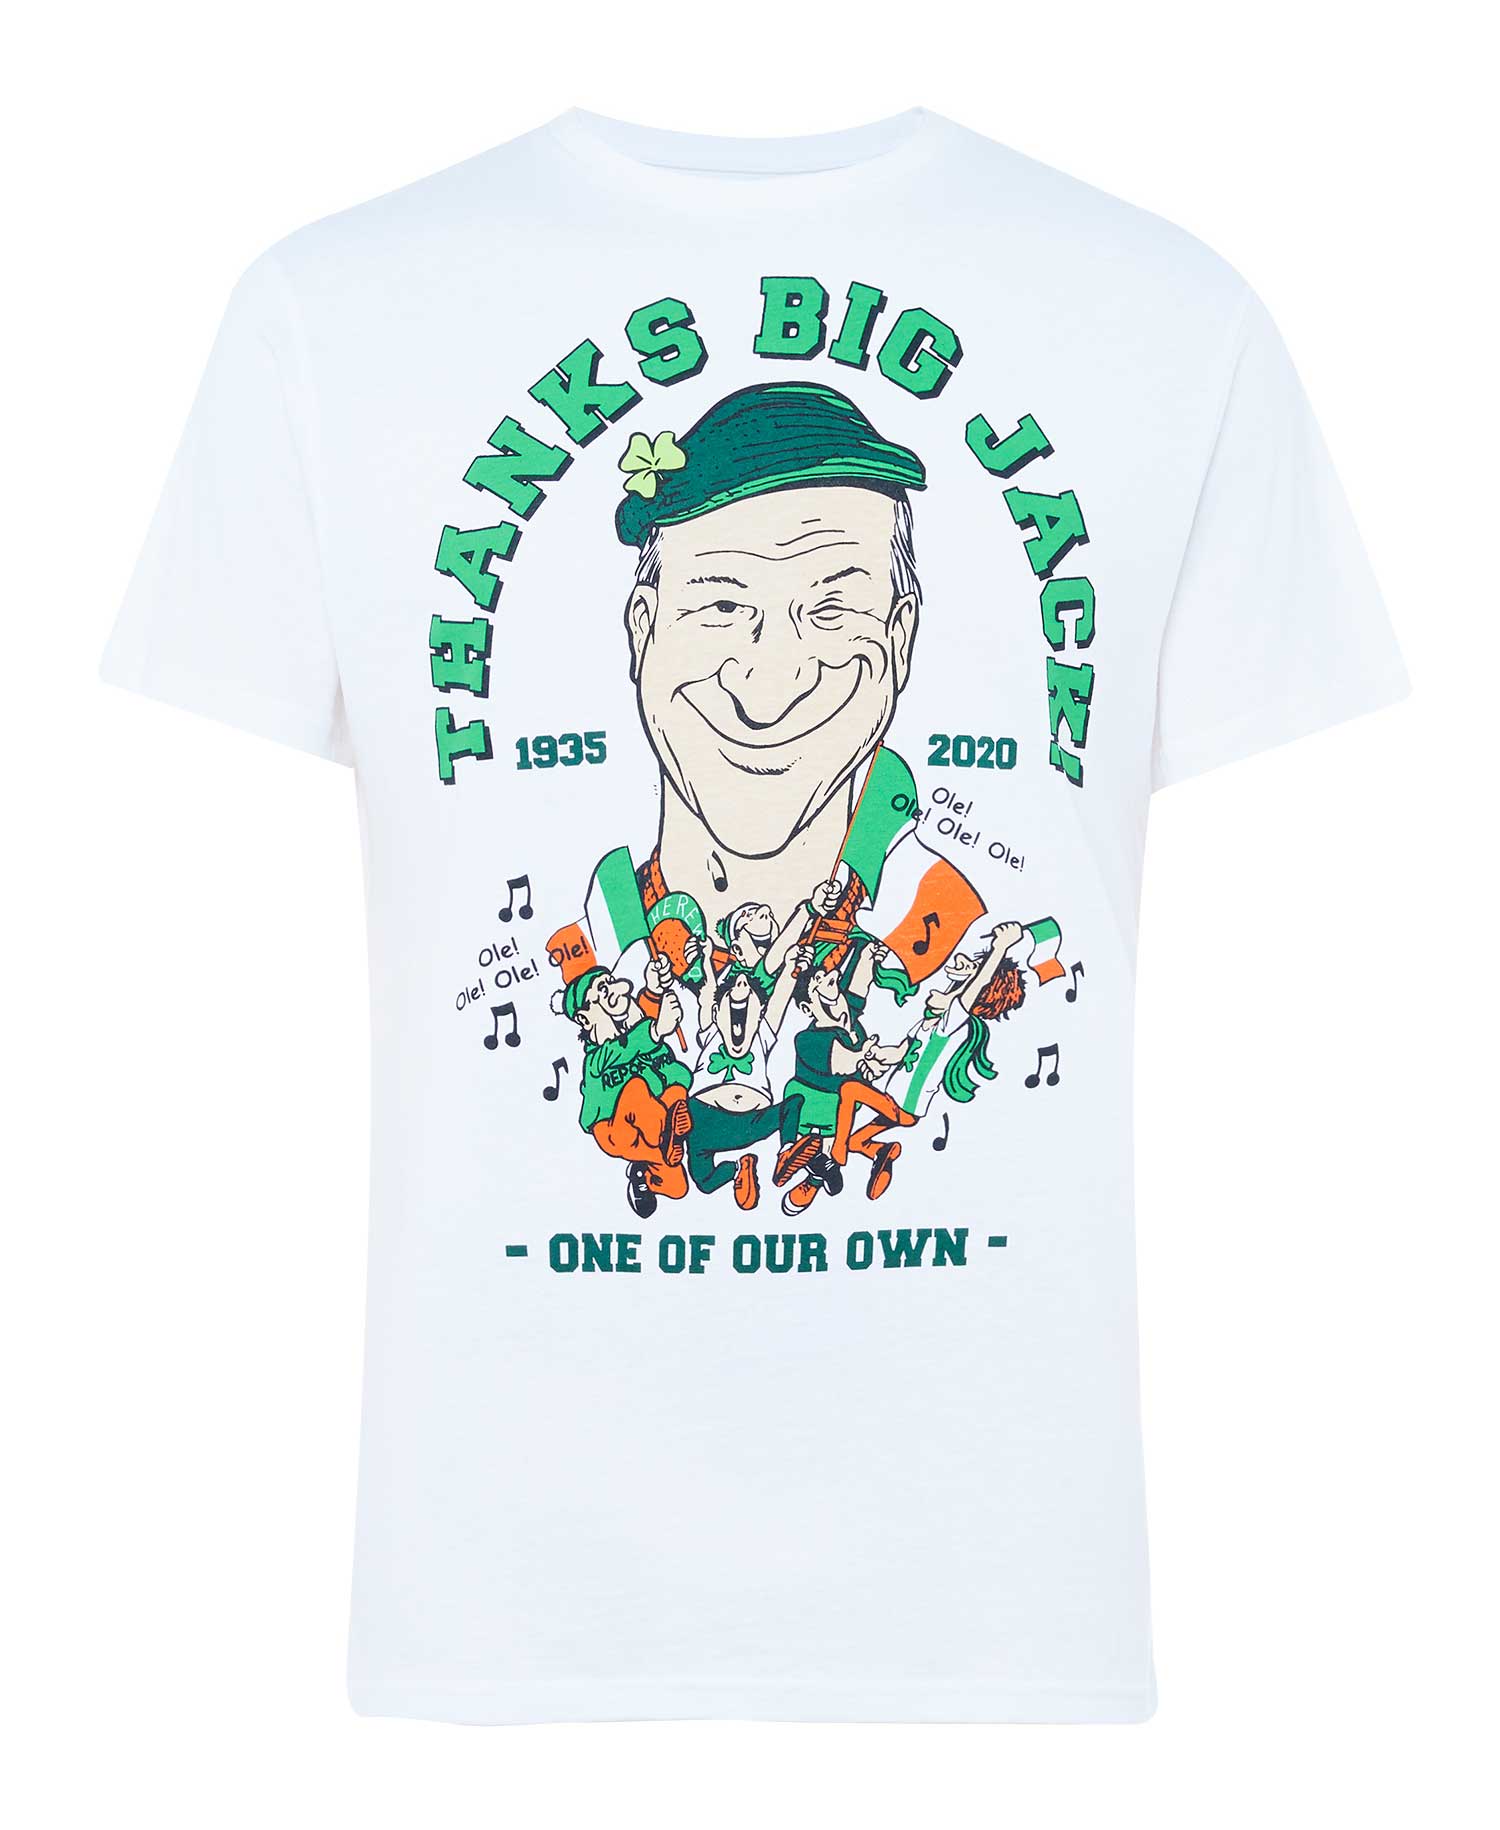 The limited edition Jack Charlton t-shirt from Penneys